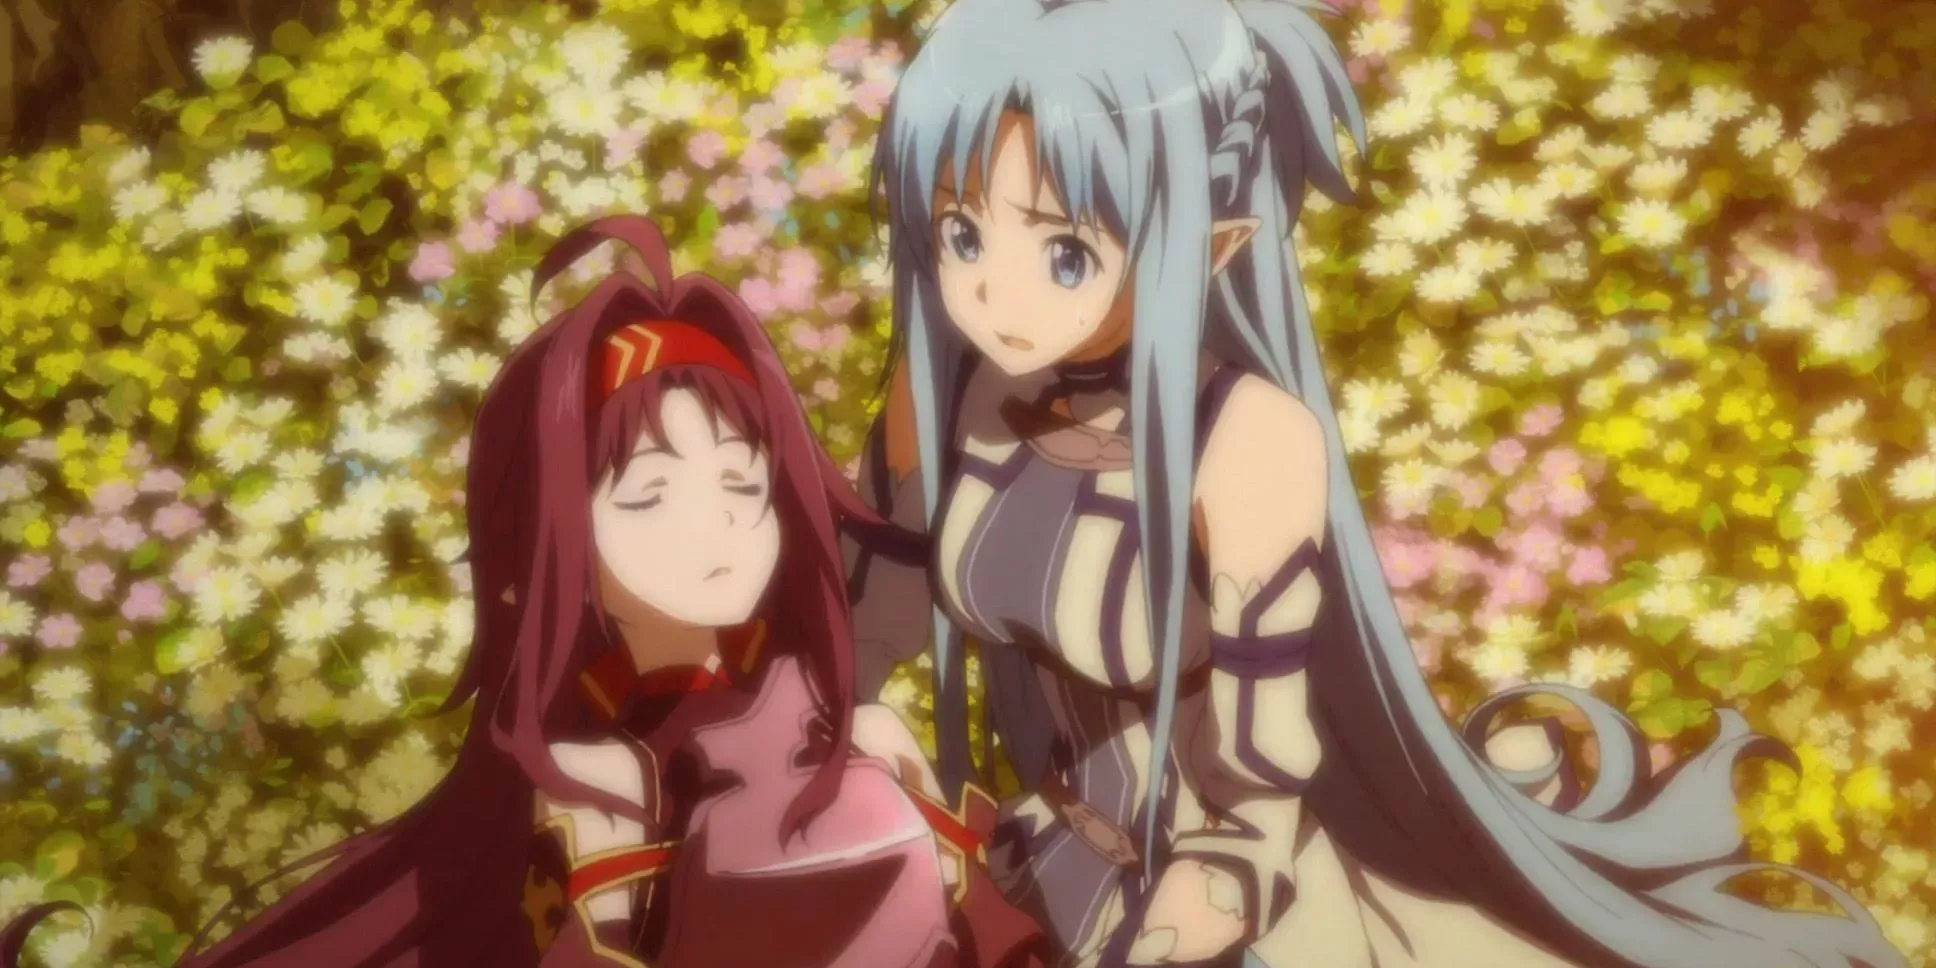 Asuna holding Yuuki in her arms in Sword Art Online.